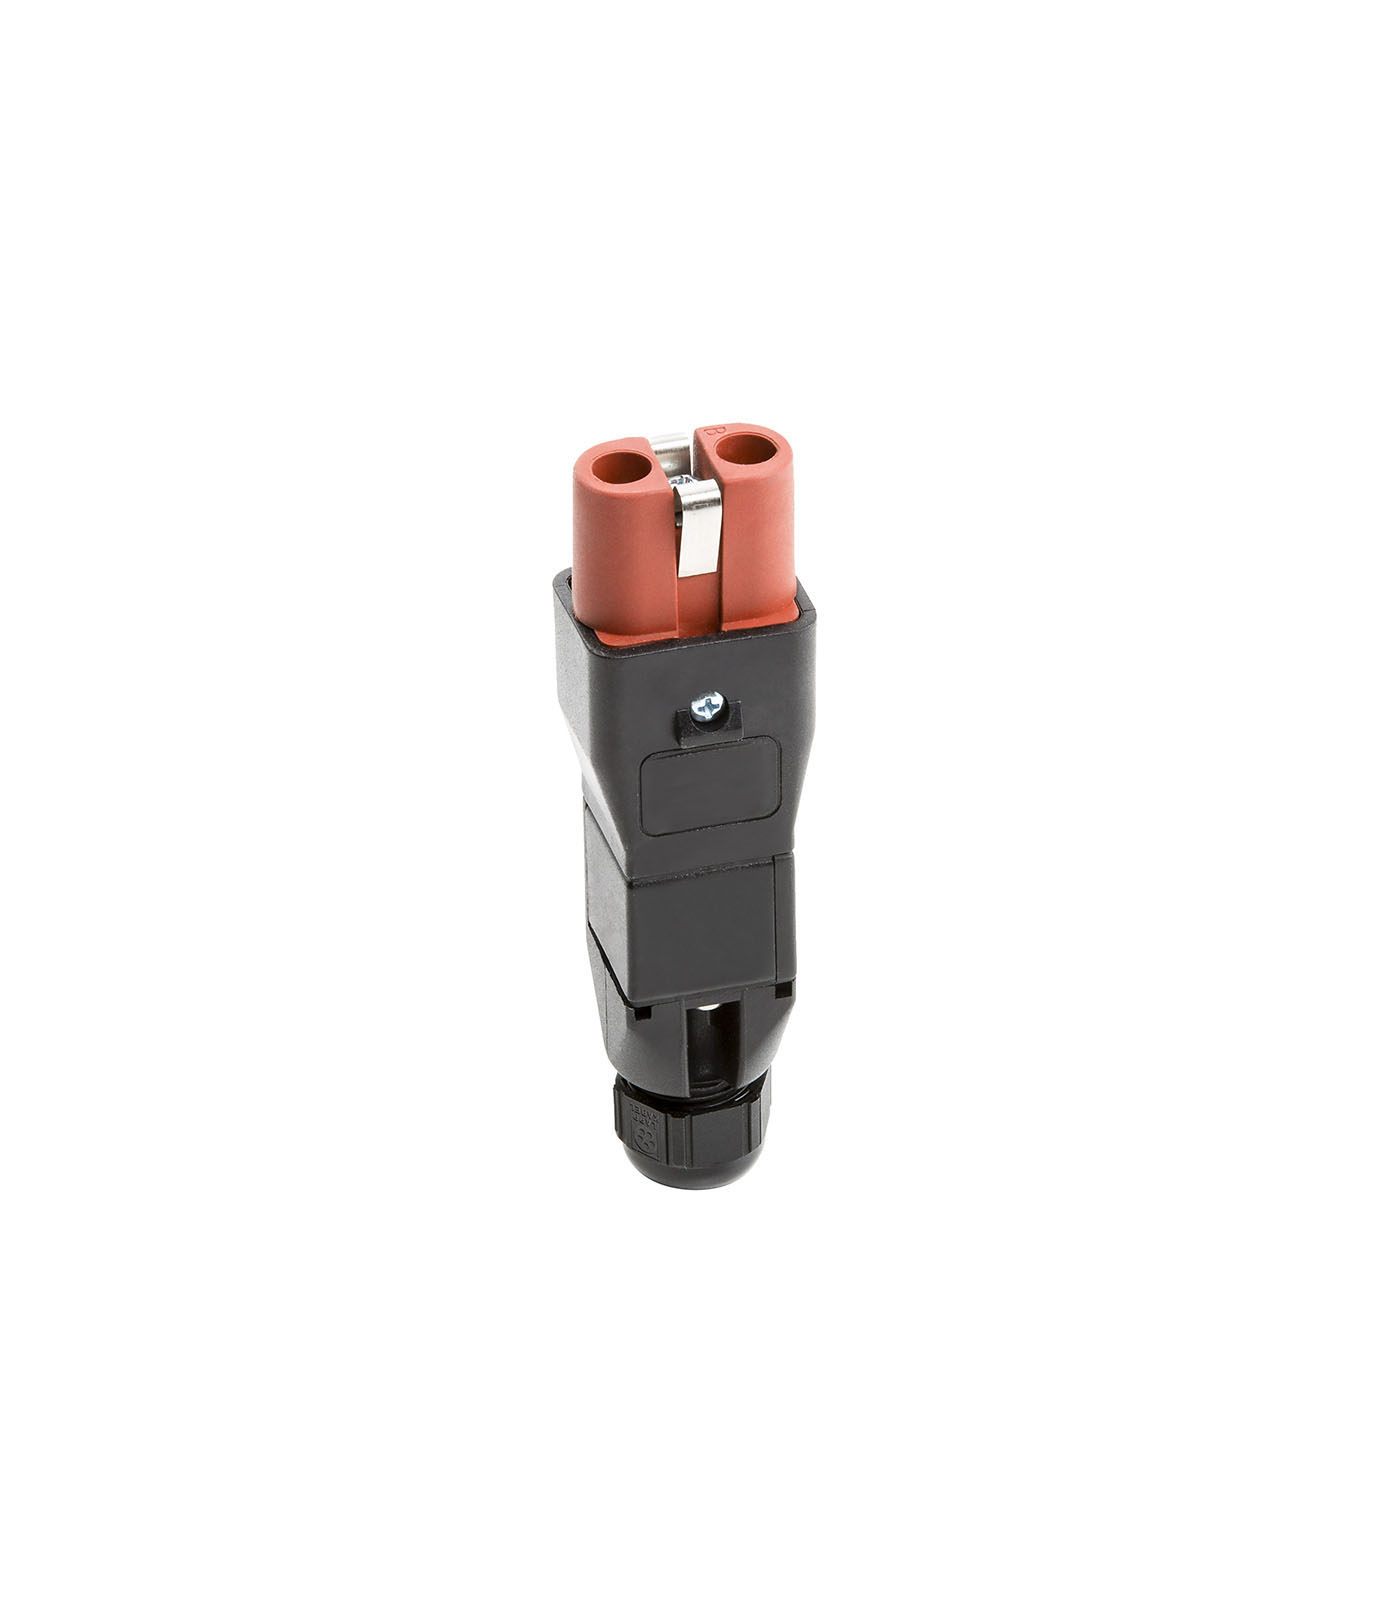 NPH High Temperature European Sockets/Connectors with Silicone Rubber Base, Low Profile